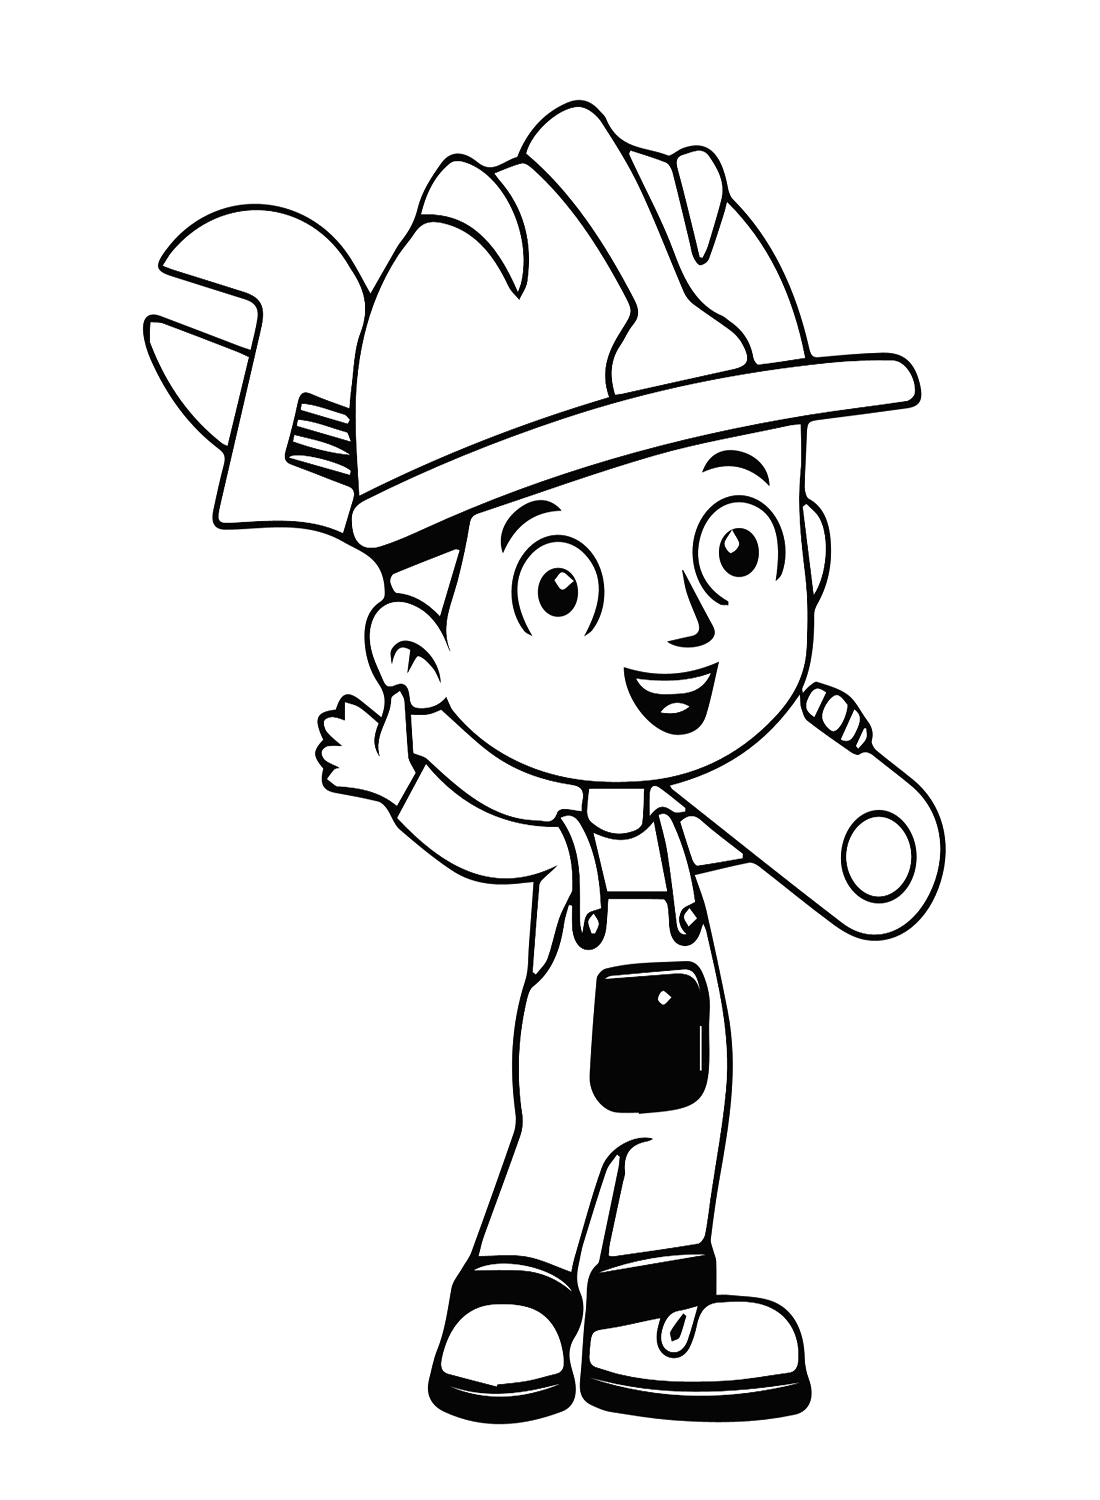 Boy and Wrench Coloring Page